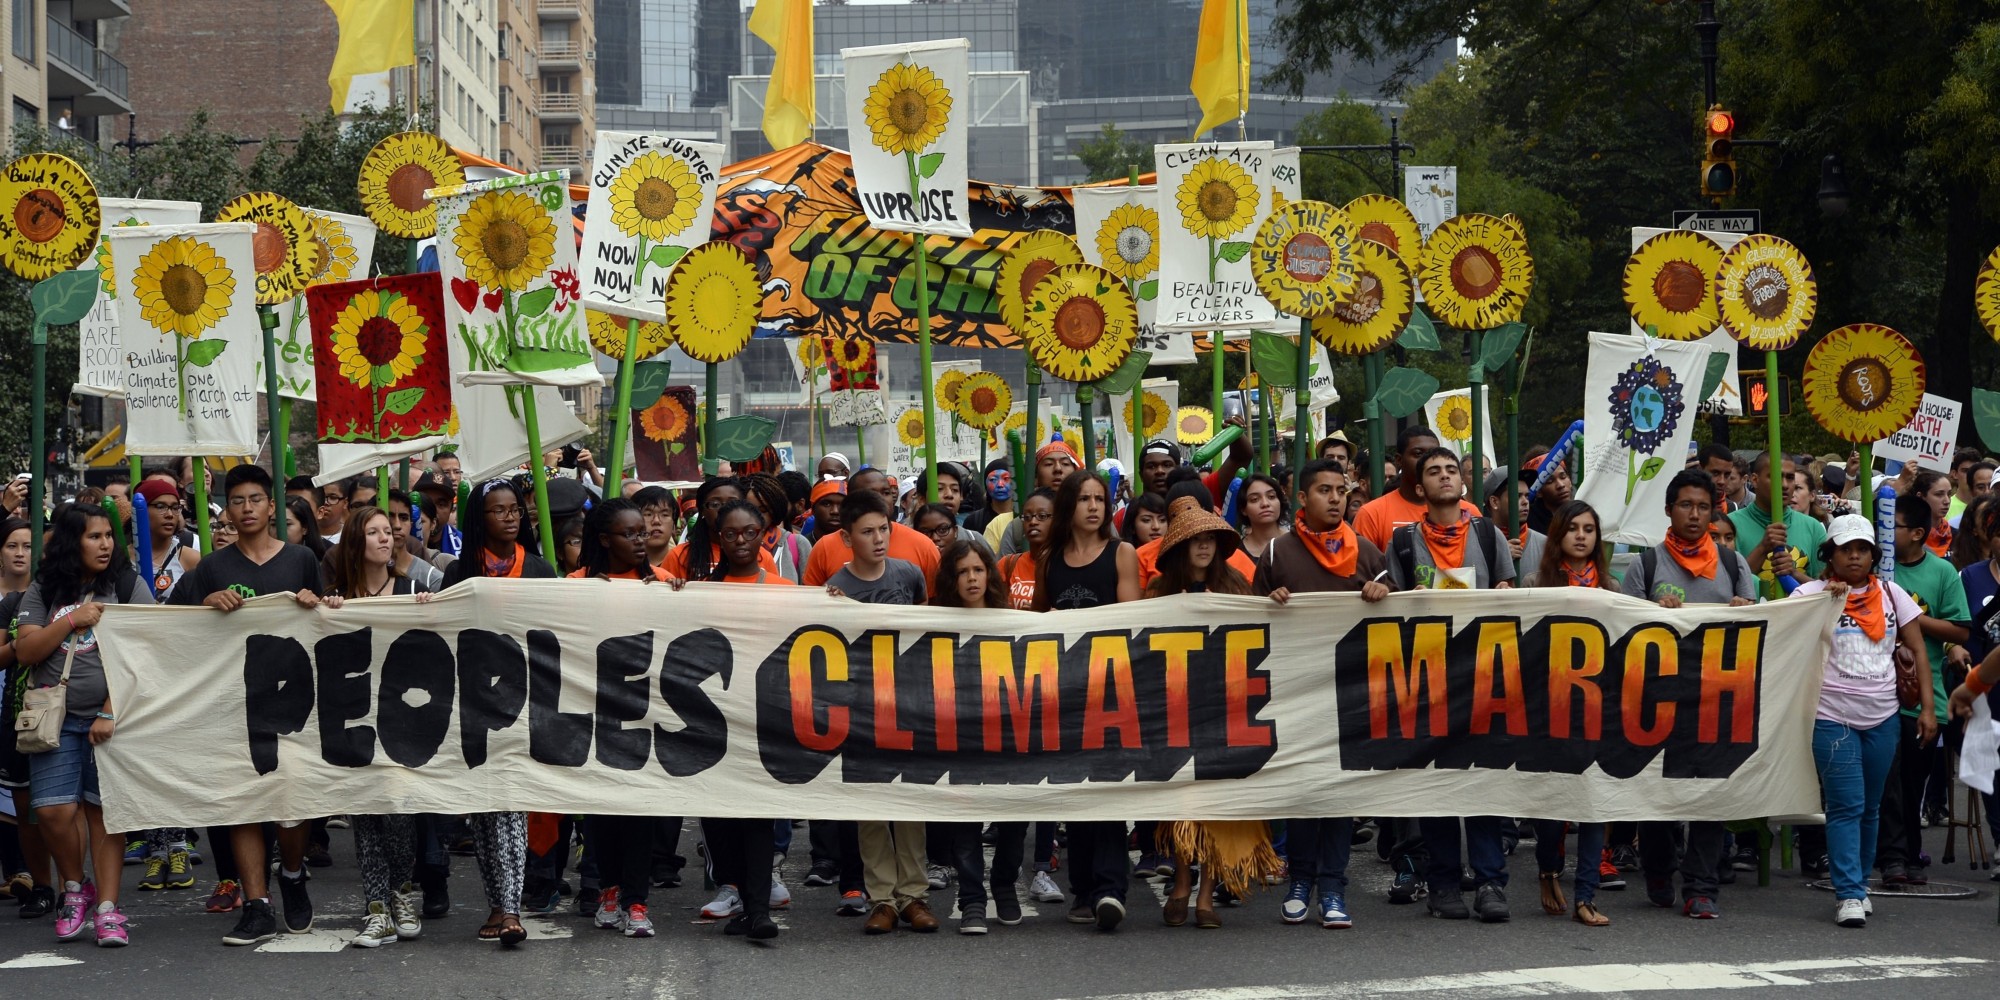 Hundreds Of Thousands Turn Out For the 2014 People’s Climate March In New York City.